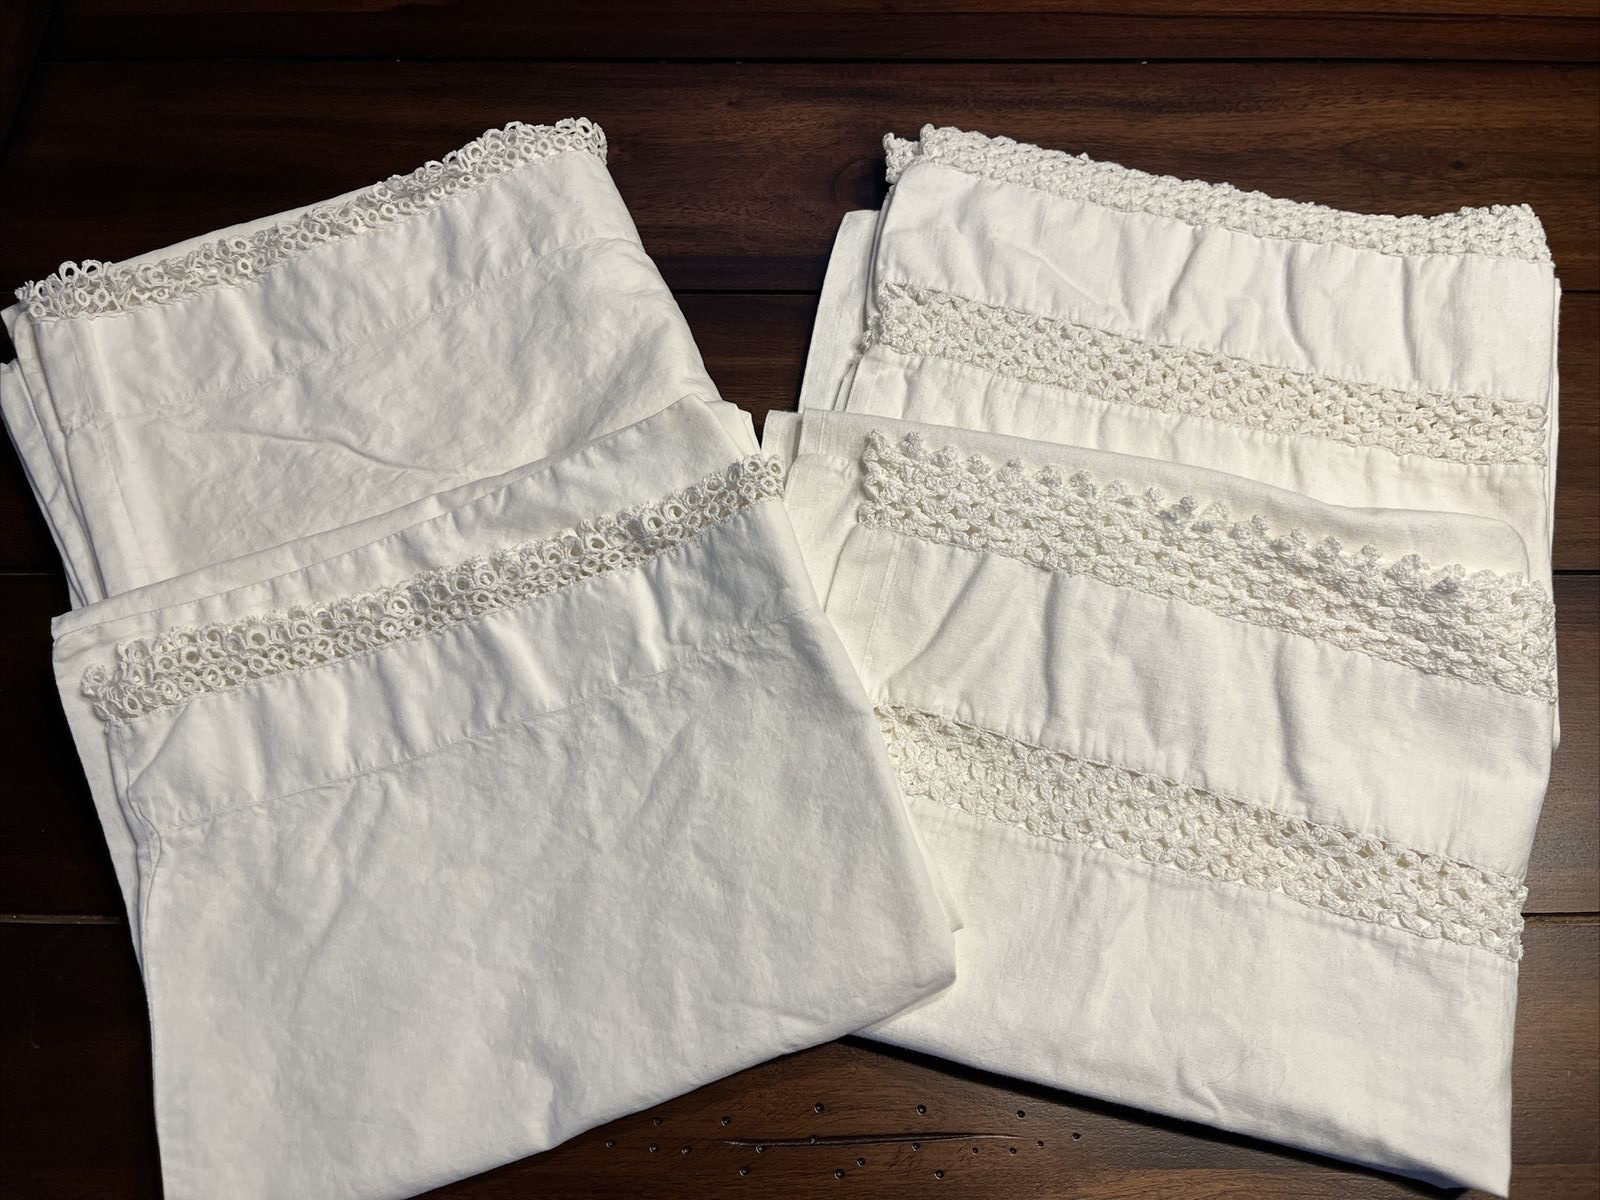 Two Pair (4) White Cotton Pillowcase with crochet trim; Queen Size